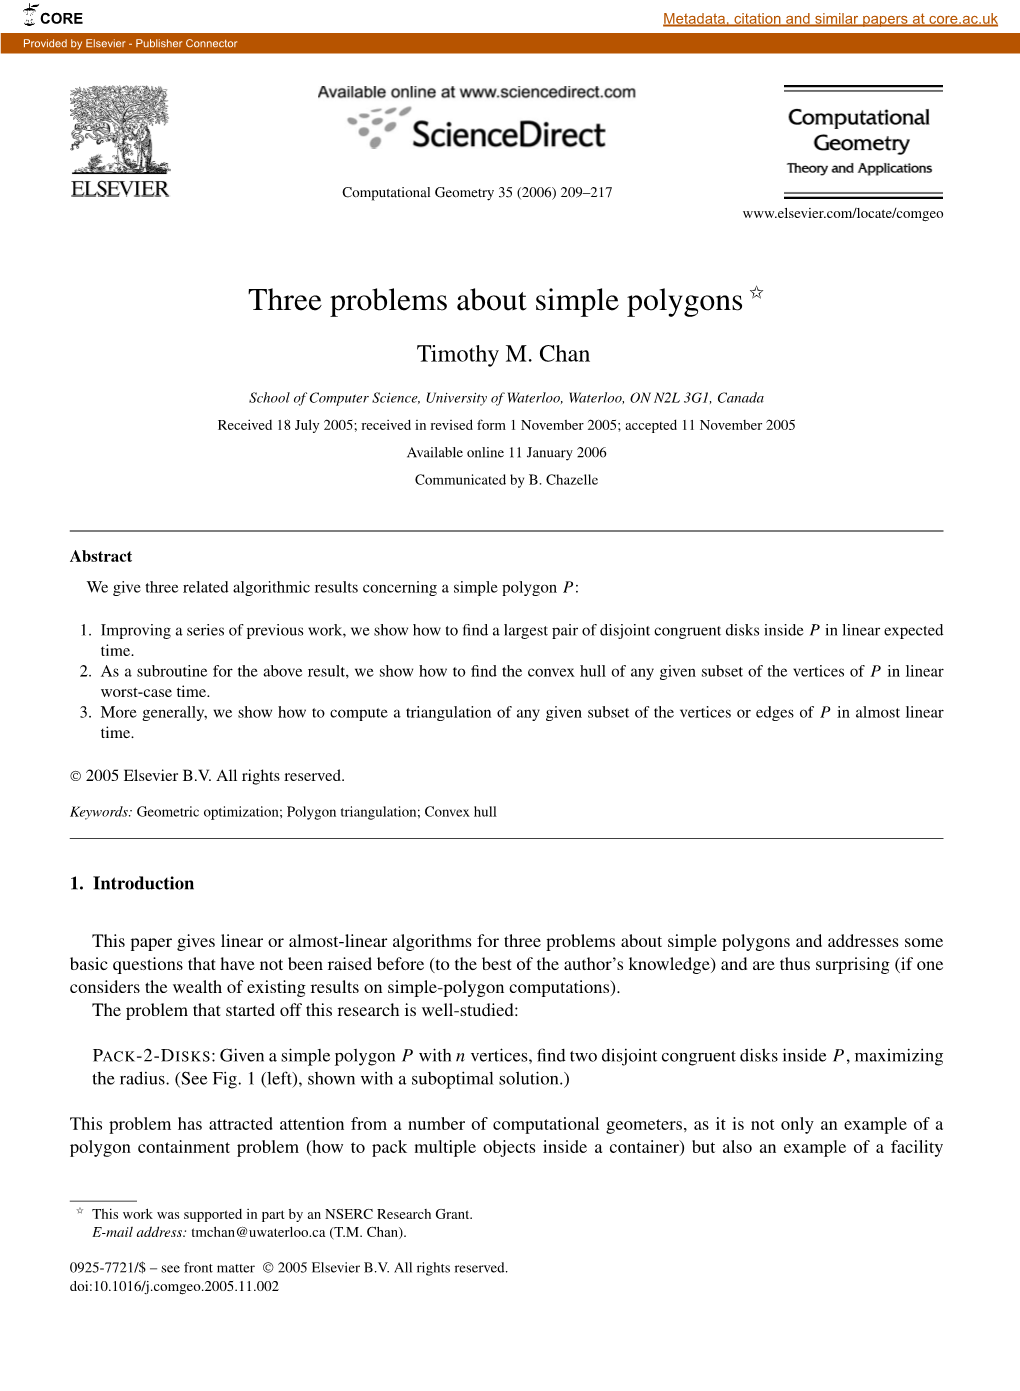 Three Problems About Simple Polygons ✩